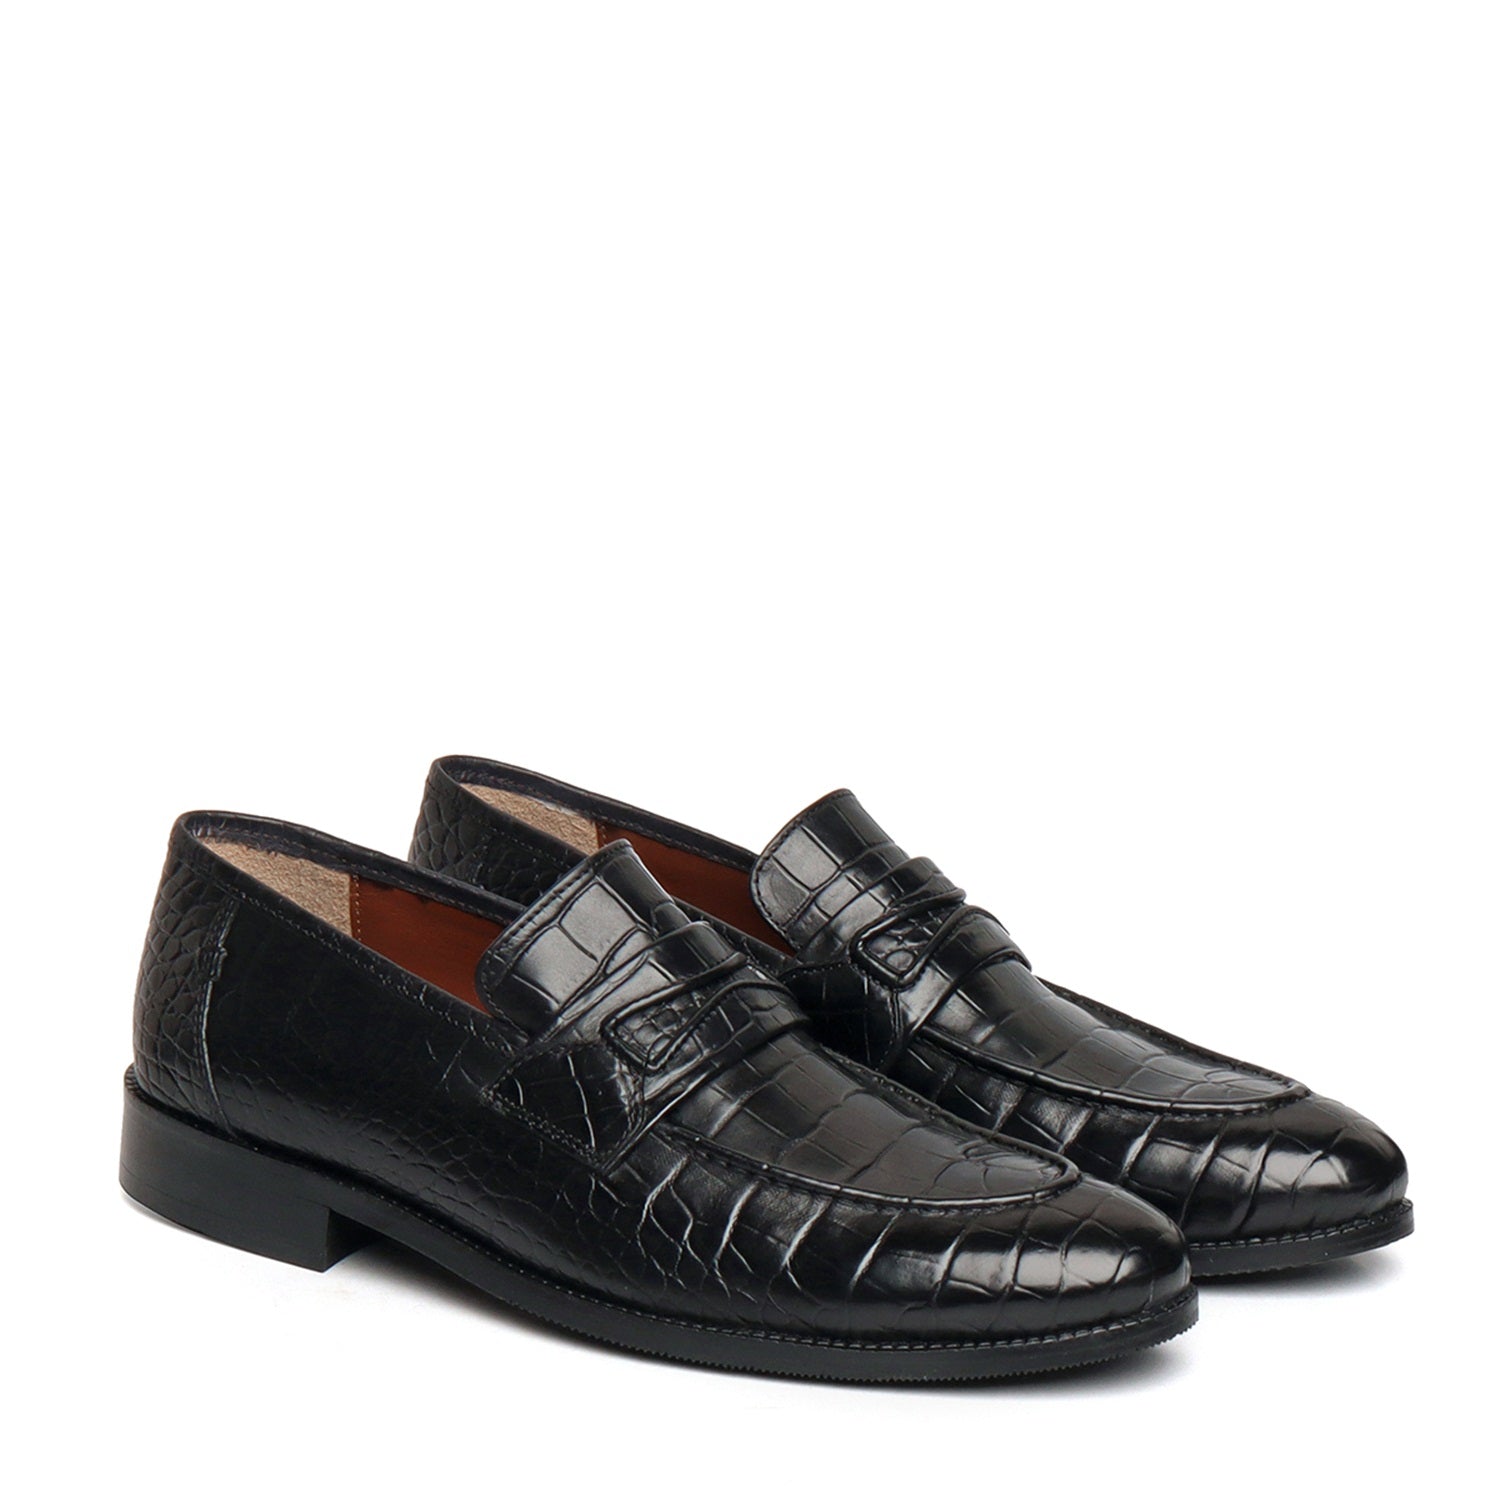 Black Penny Loafers with Cut Croco Leather